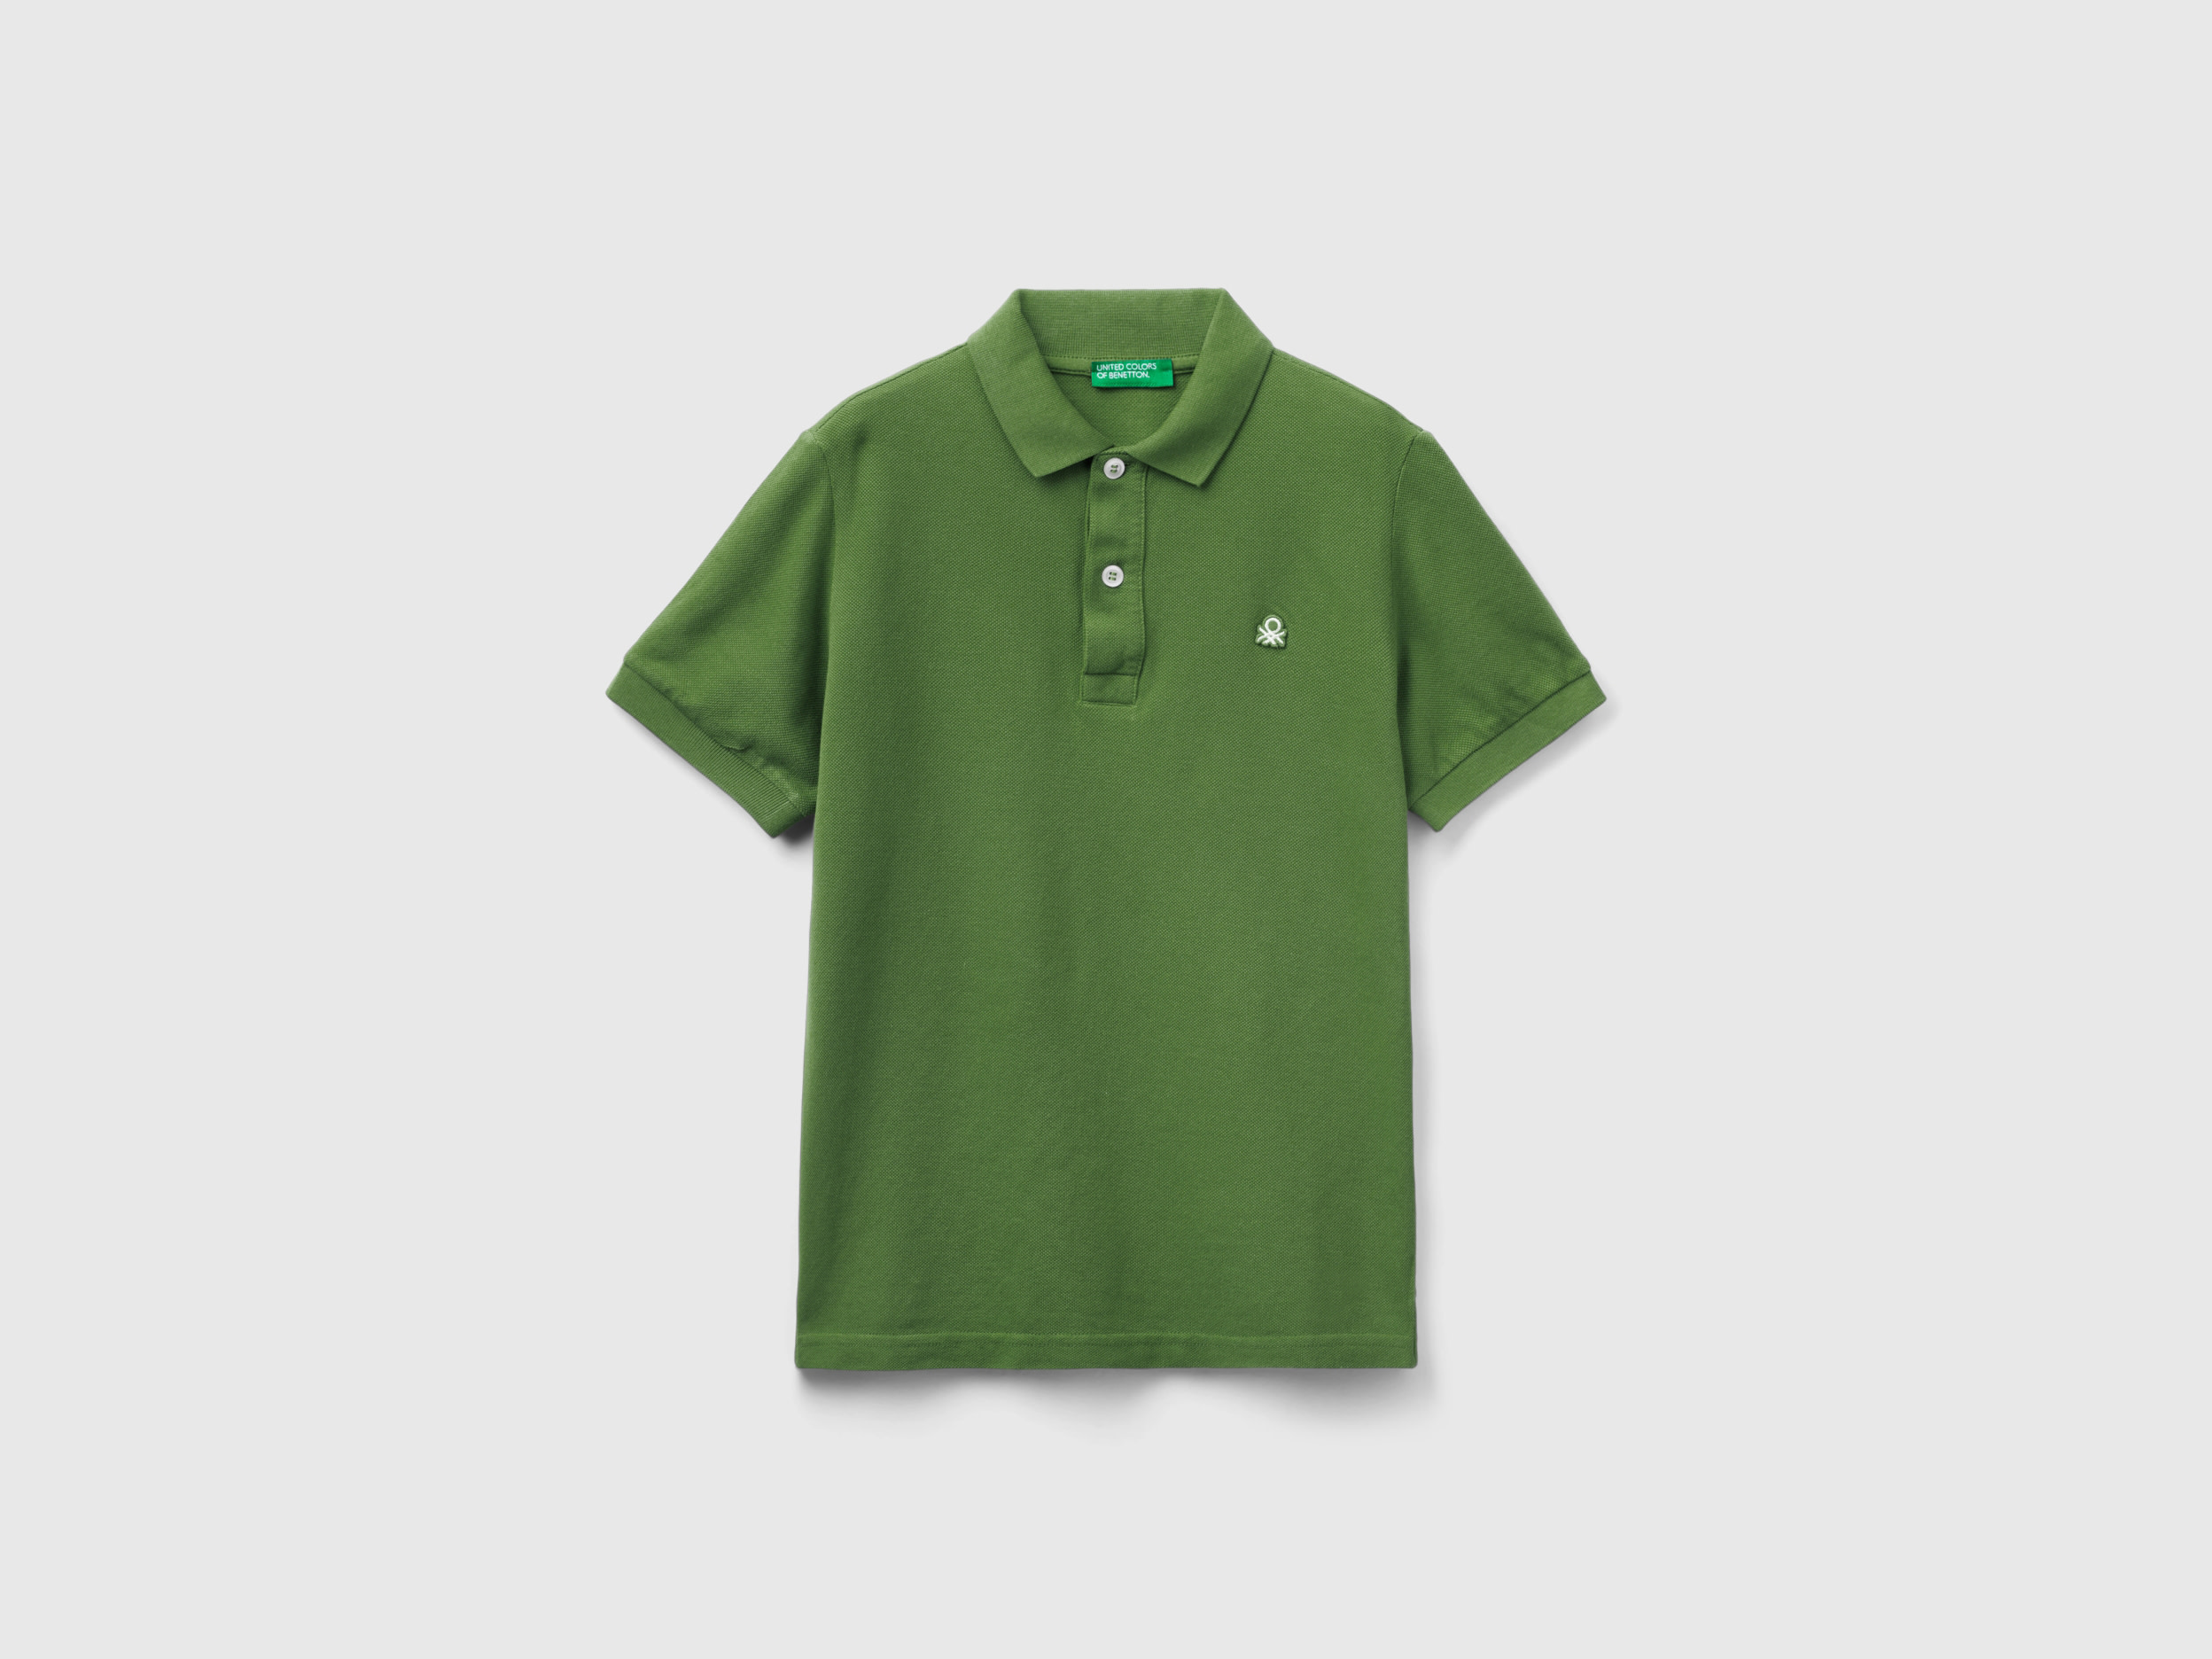 Image of Benetton, Slim Fit Polo In 100% Organic Cotton, size L, Green, Kids